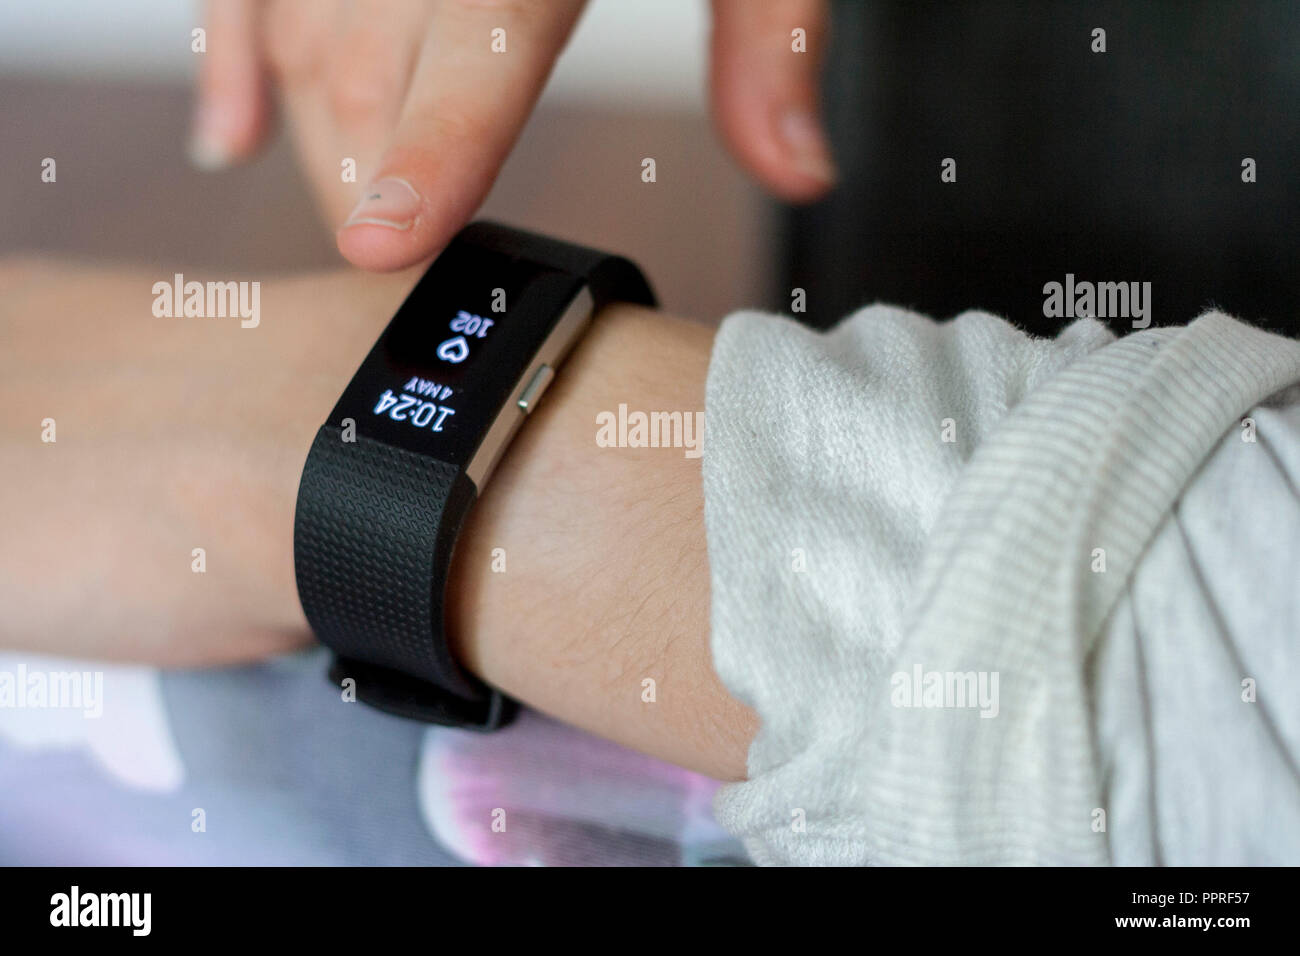 Fitbit High Resolution Stock Photography and Images - Alamy